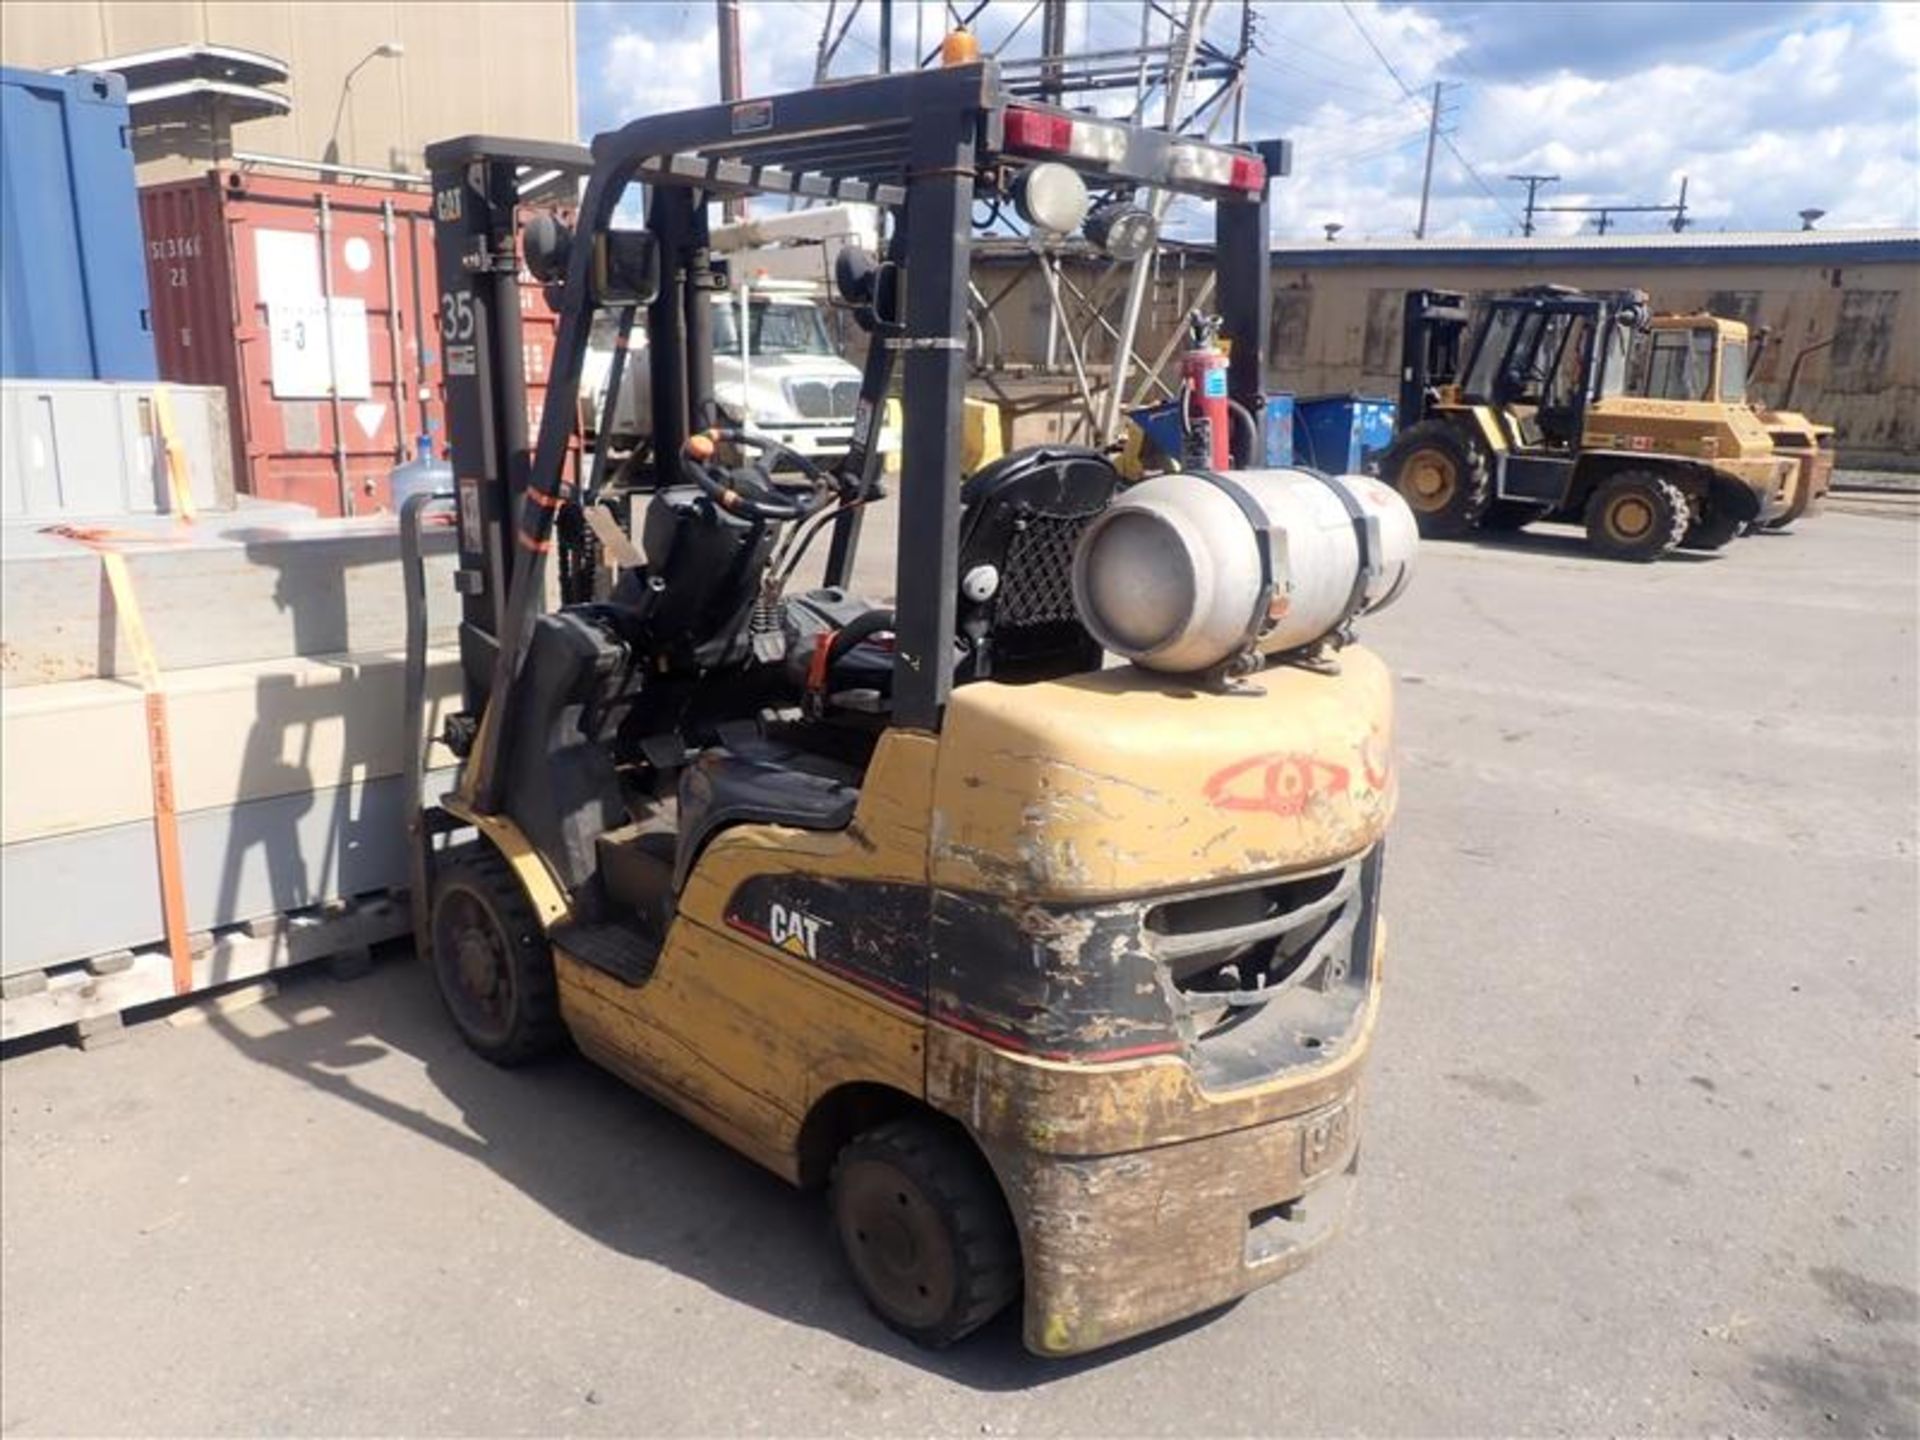 CAT forklift truck, mod. C5000, ser. no. AT9004292, propane, 2-stage, hour meter reads N/A (Tag 9098